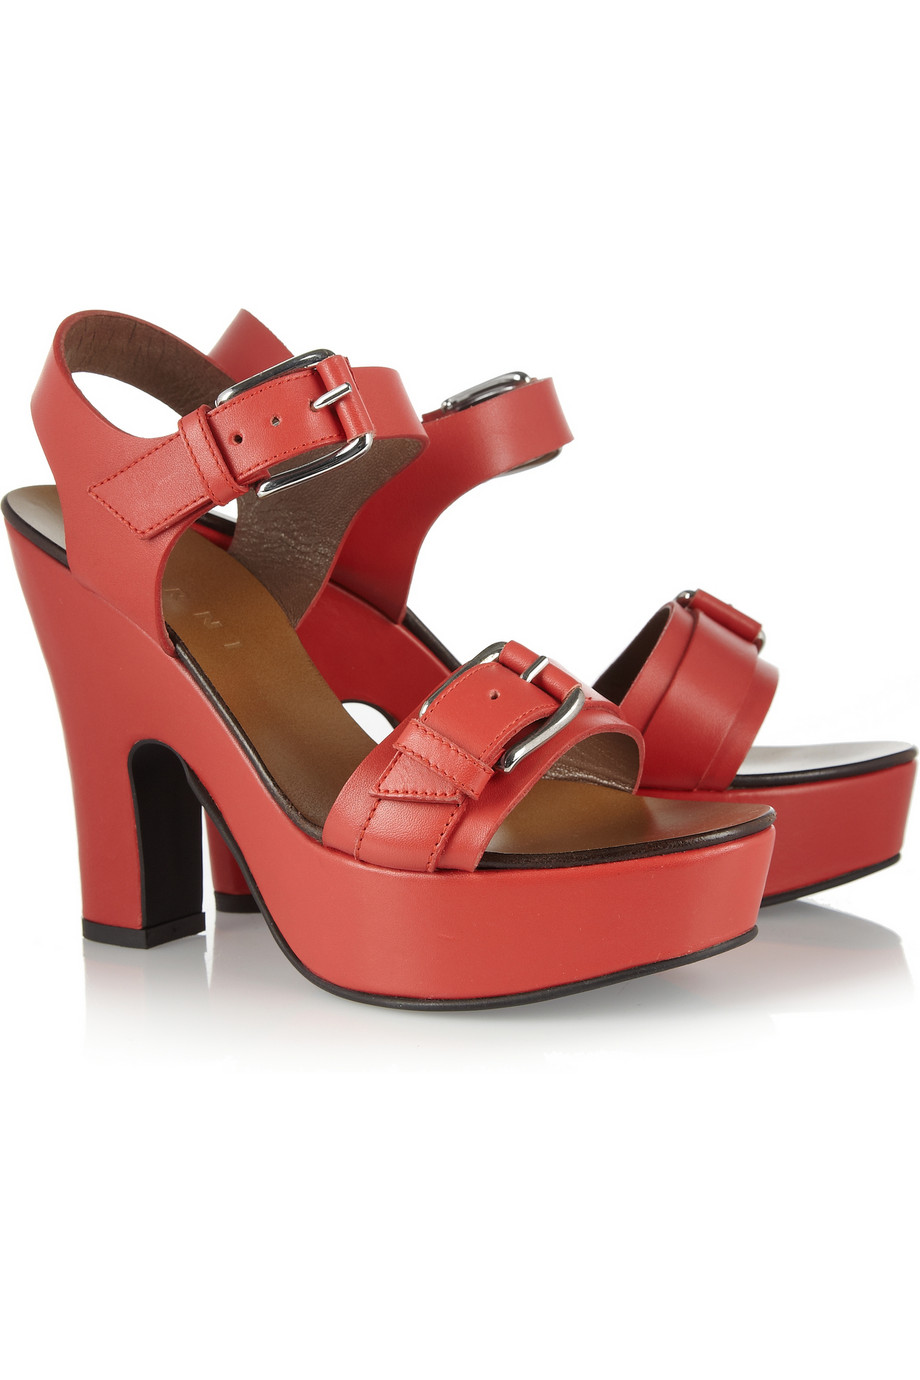 Lyst - Marni Leather Platform Sandals in Red